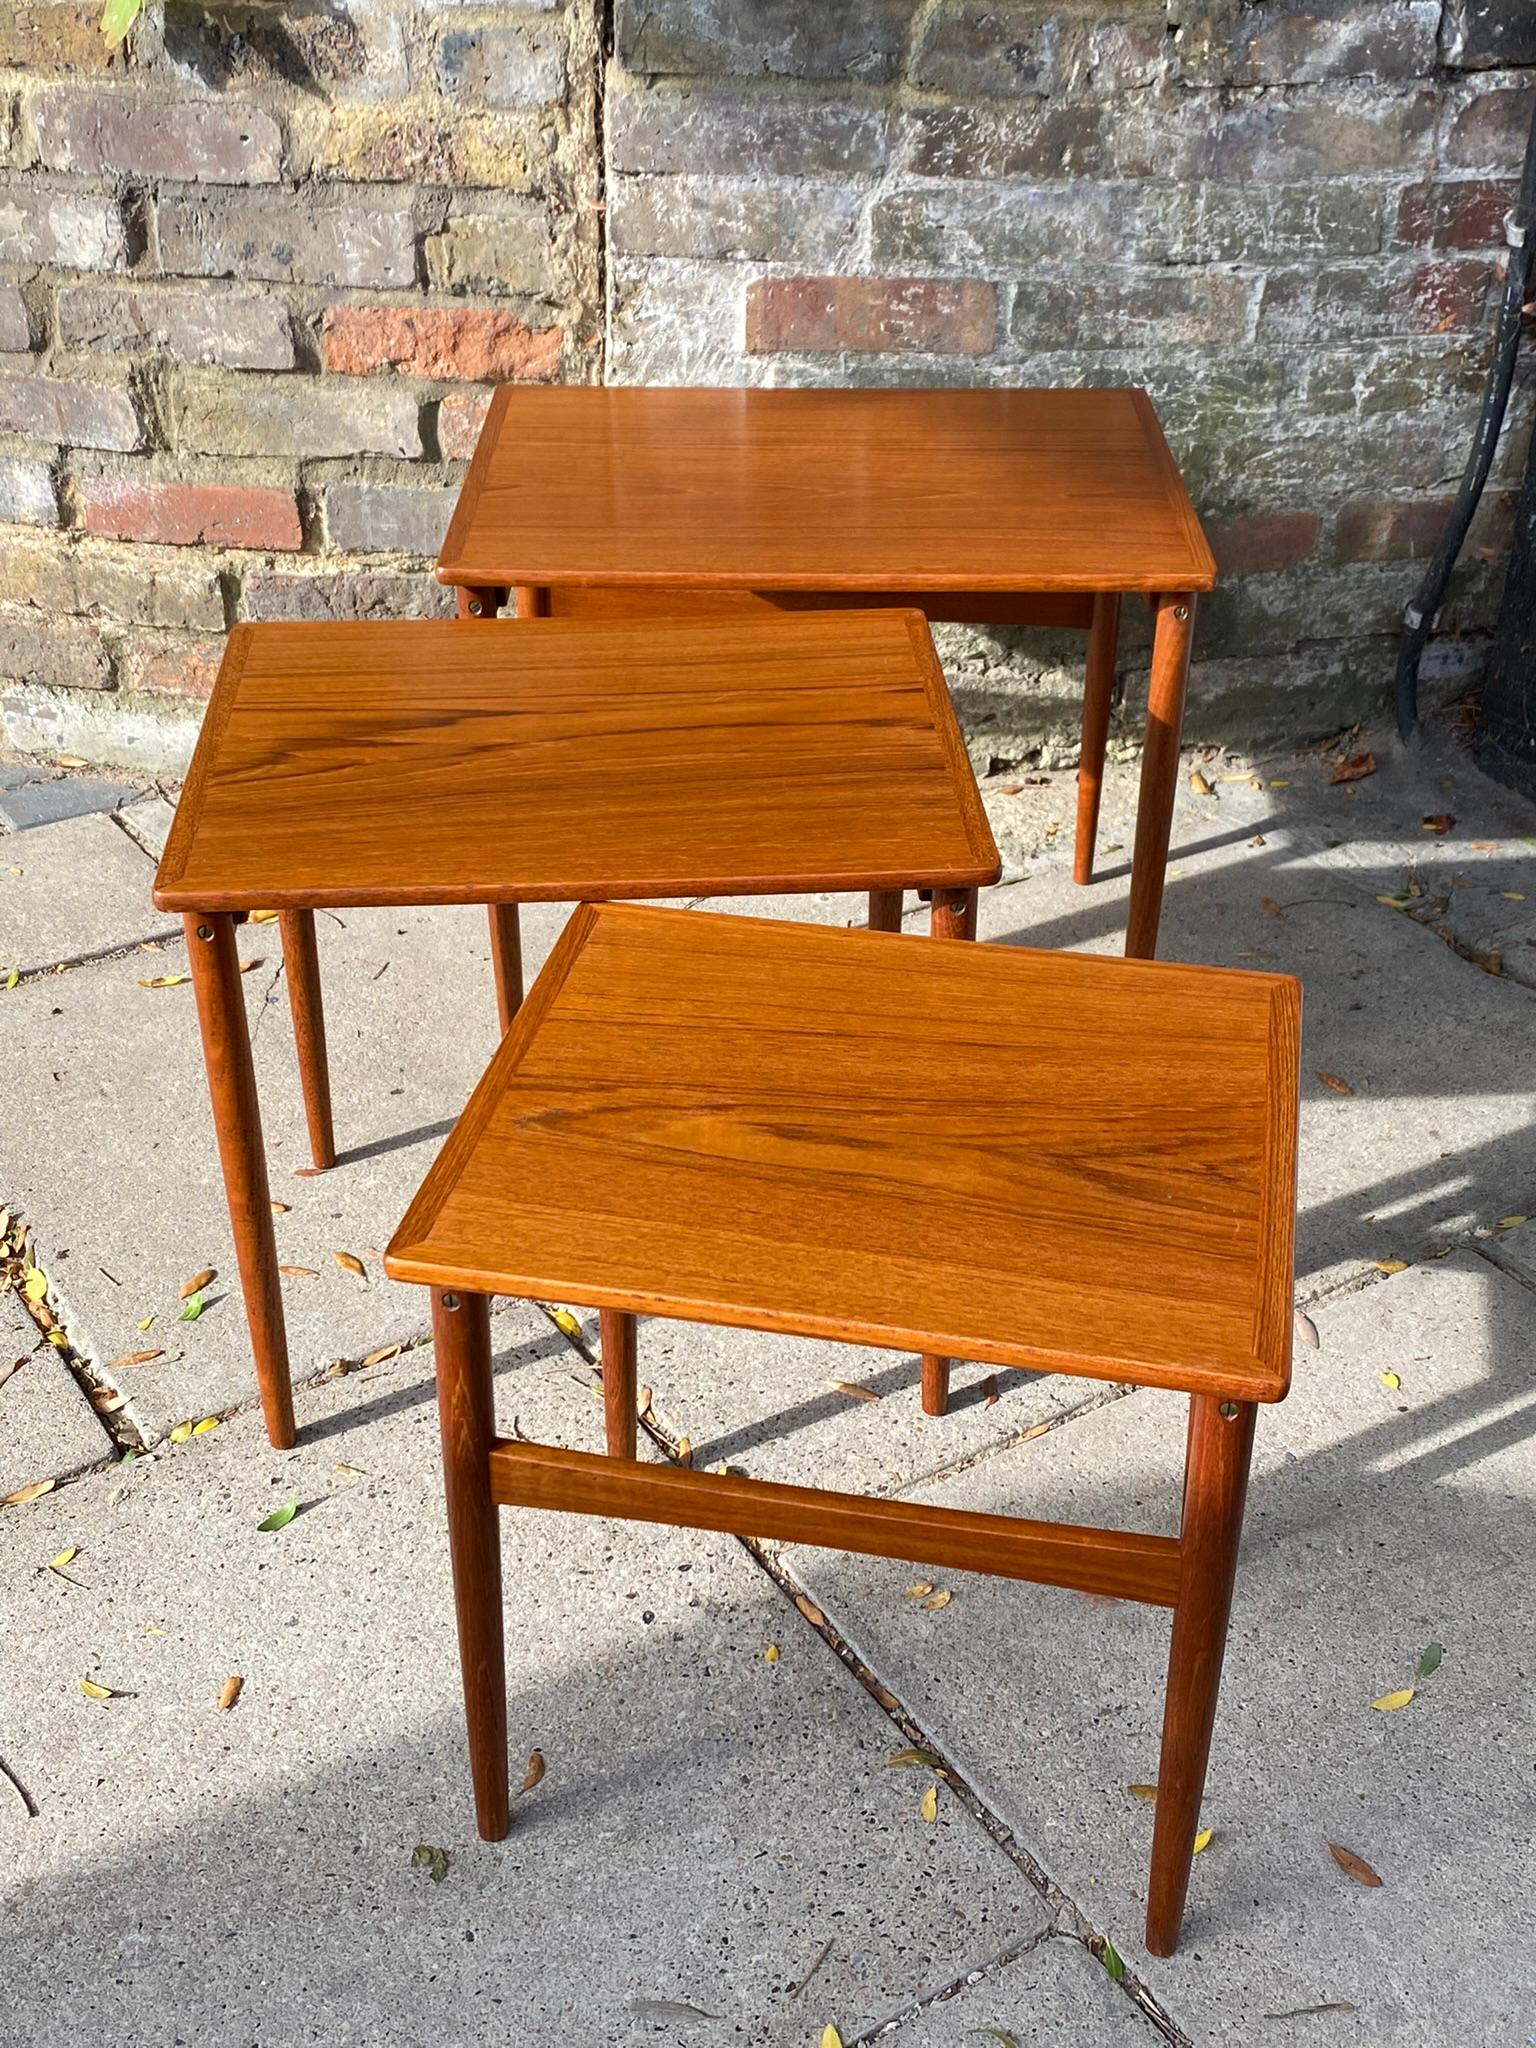 Mid-Century Modern Mid-Century Teak Nest of Tables By Peter Brink for BR Gelsted, Denmark, C. 1960s For Sale